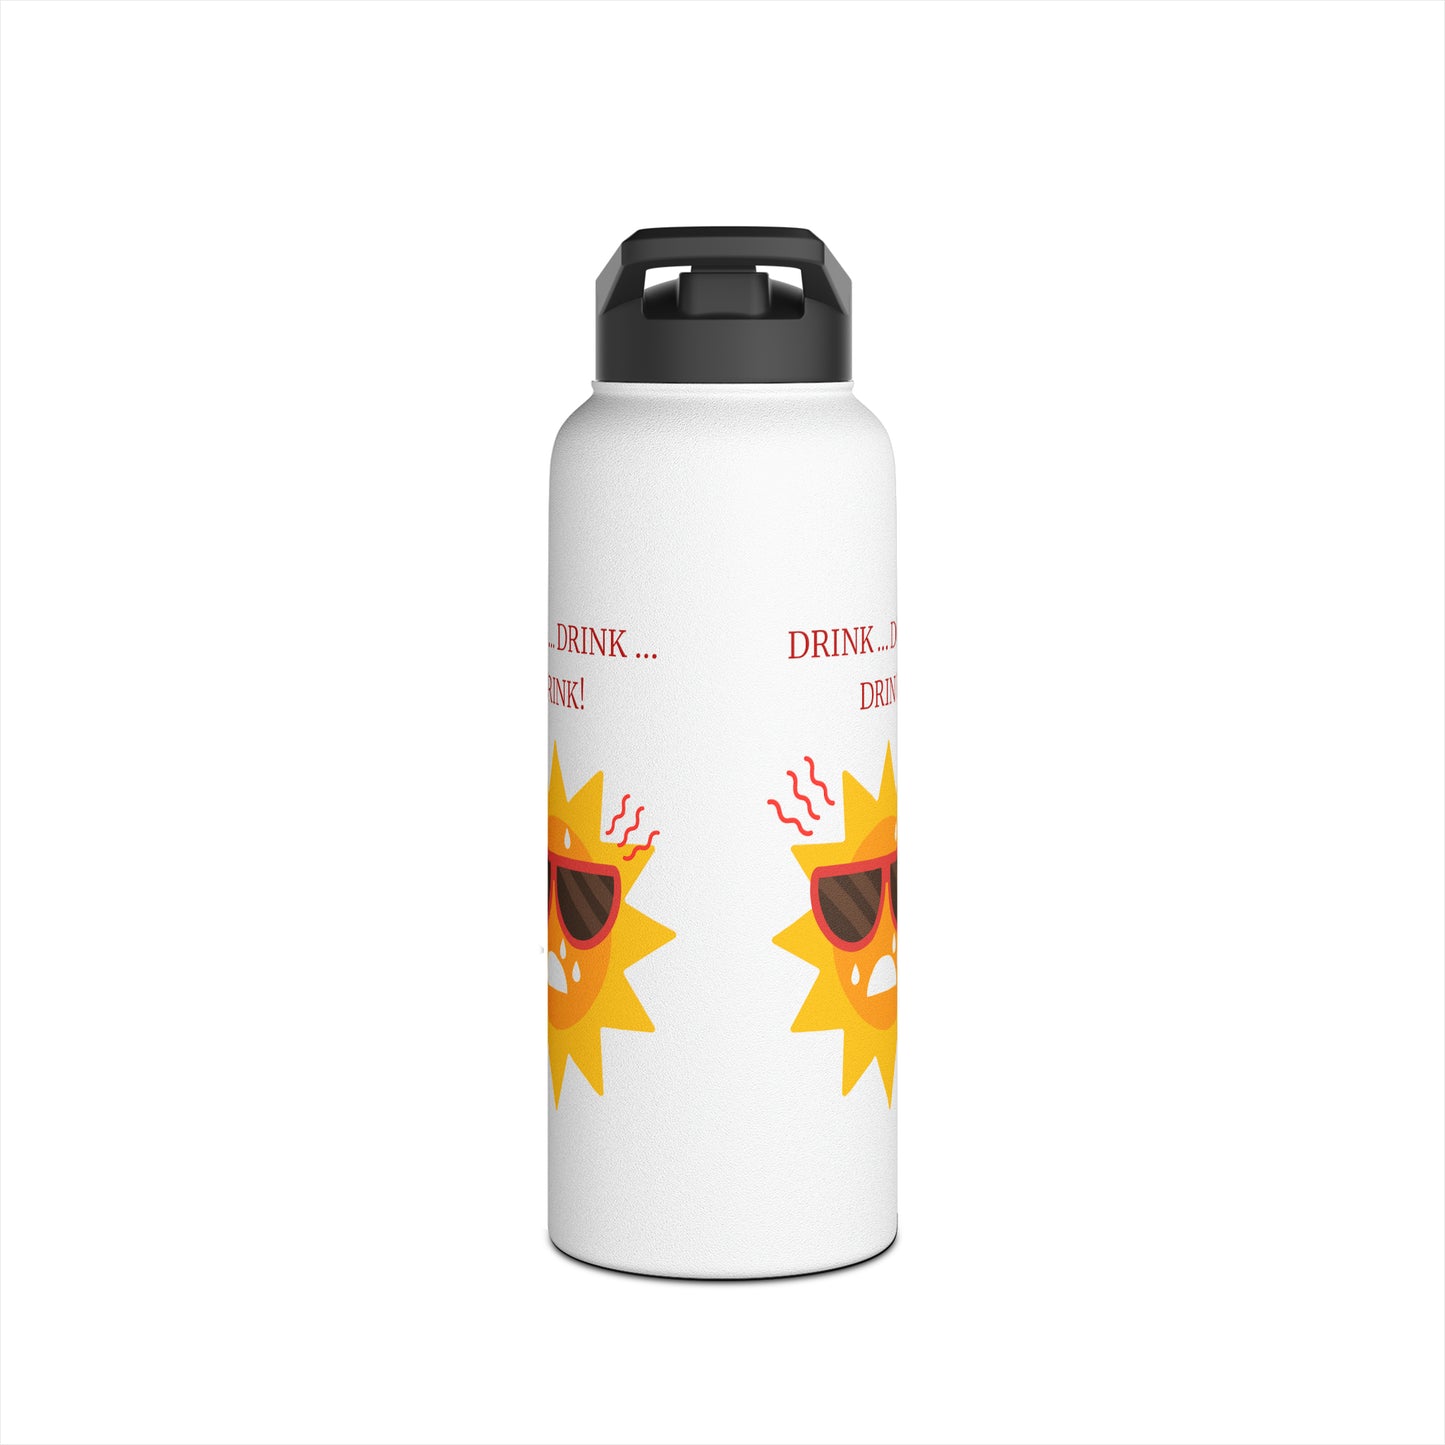 Cute Water Bottle: 3 sizes; Stainless Steel; Ring Handle Lid